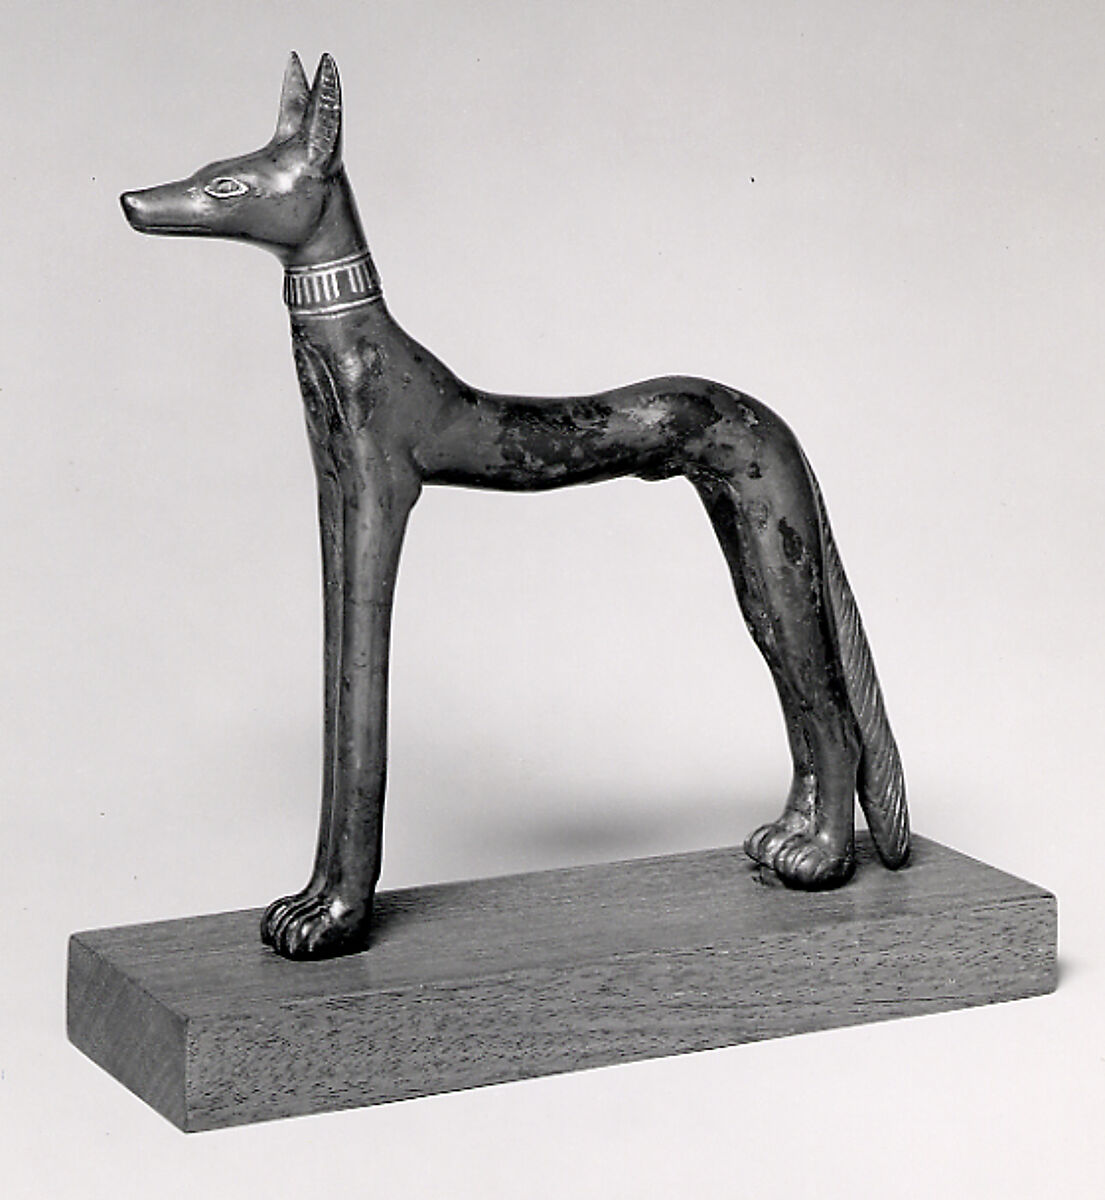 Statuette of Wepwawet, Bronze or copper alloy, gold inlay 